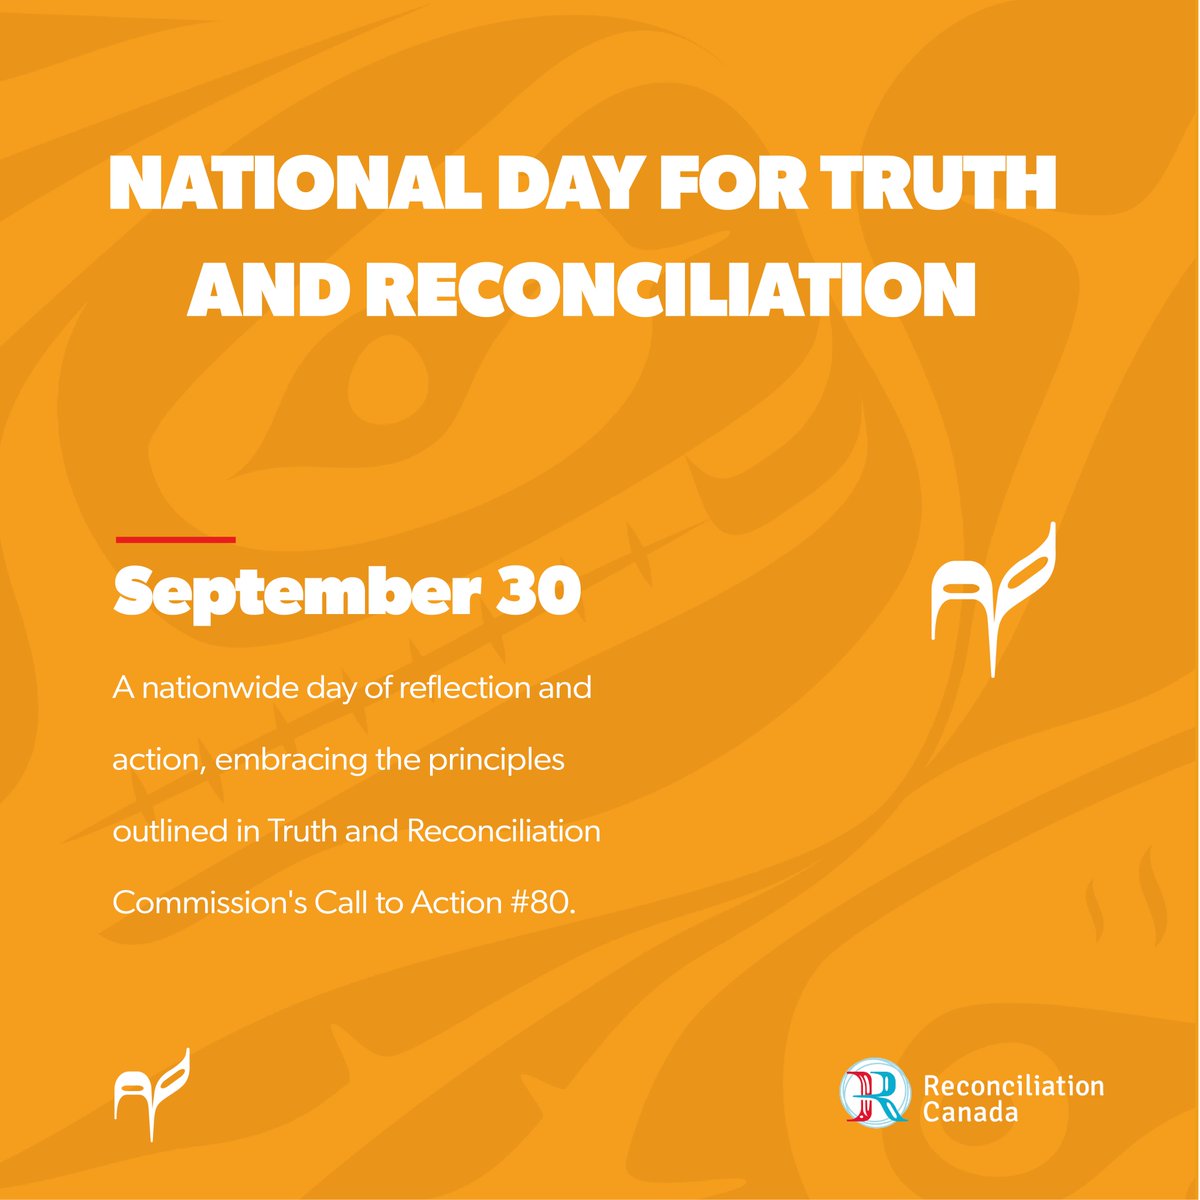 This #OrangeShirtDay, let's unite in remembrance and action. Amplify voices, and commit to reconciliation. #EveryChildMatters #TruthAndReconciliation